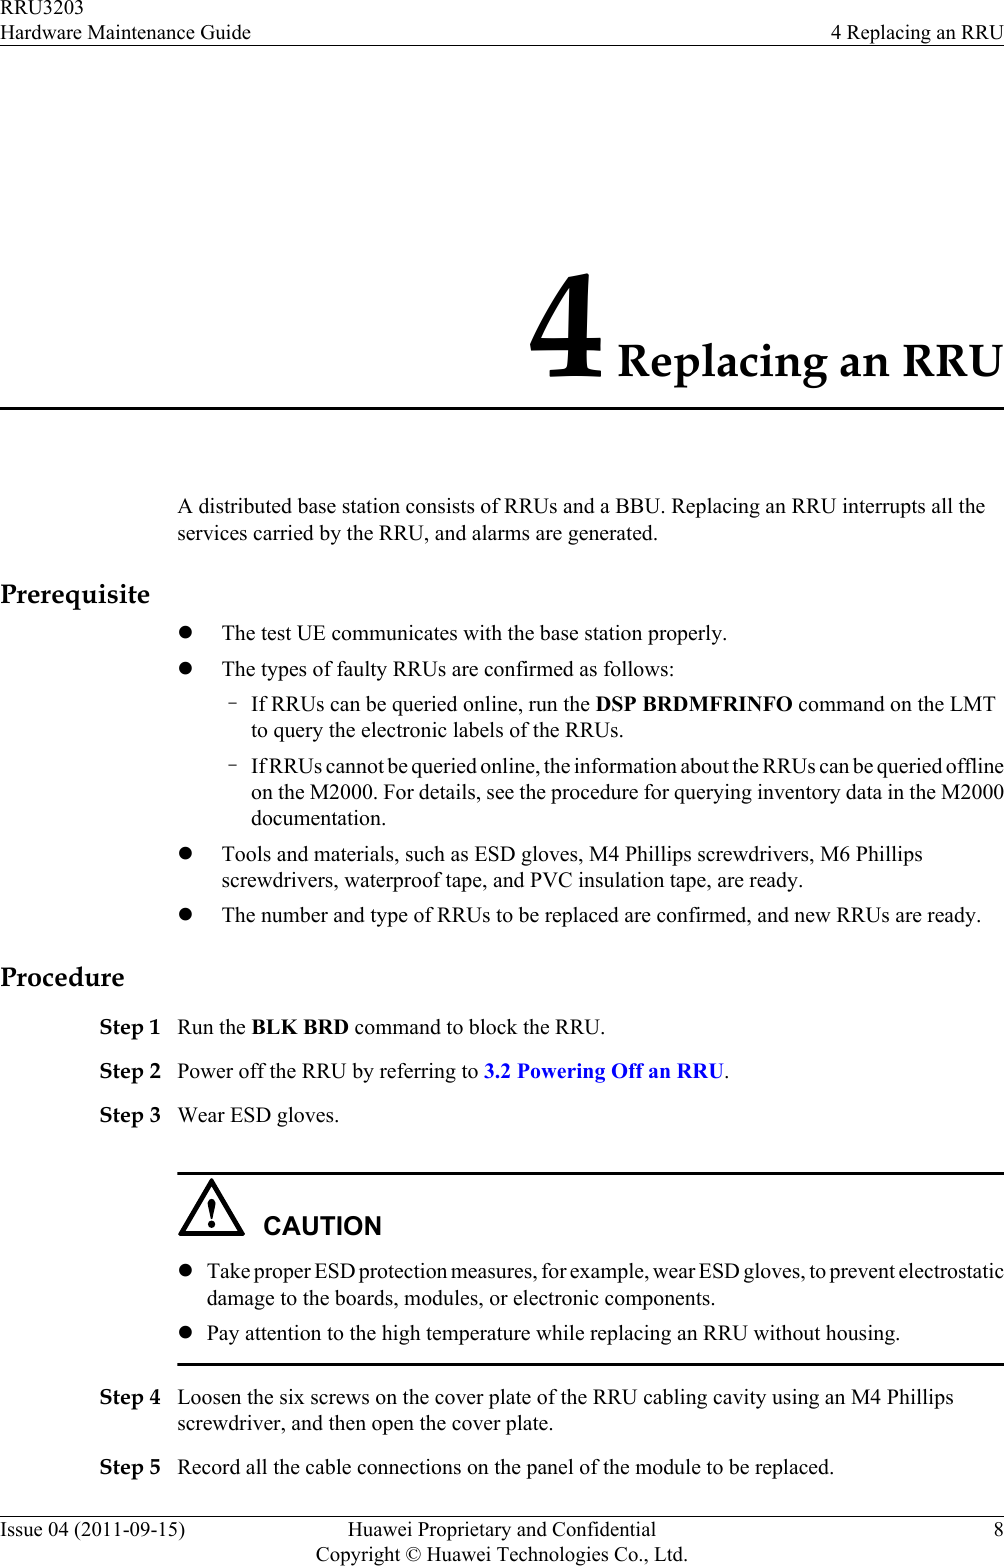 4 Replacing an RRUA distributed base station consists of RRUs and a BBU. Replacing an RRU interrupts all theservices carried by the RRU, and alarms are generated.PrerequisitelThe test UE communicates with the base station properly.lThe types of faulty RRUs are confirmed as follows:–If RRUs can be queried online, run the DSP BRDMFRINFO command on the LMTto query the electronic labels of the RRUs.–If RRUs cannot be queried online, the information about the RRUs can be queried offlineon the M2000. For details, see the procedure for querying inventory data in the M2000documentation.lTools and materials, such as ESD gloves, M4 Phillips screwdrivers, M6 Phillipsscrewdrivers, waterproof tape, and PVC insulation tape, are ready.lThe number and type of RRUs to be replaced are confirmed, and new RRUs are ready.ProcedureStep 1 Run the BLK BRD command to block the RRU.Step 2 Power off the RRU by referring to 3.2 Powering Off an RRU.Step 3 Wear ESD gloves.CAUTIONlTake proper ESD protection measures, for example, wear ESD gloves, to prevent electrostaticdamage to the boards, modules, or electronic components.lPay attention to the high temperature while replacing an RRU without housing.Step 4 Loosen the six screws on the cover plate of the RRU cabling cavity using an M4 Phillipsscrewdriver, and then open the cover plate.Step 5 Record all the cable connections on the panel of the module to be replaced.RRU3203Hardware Maintenance Guide 4 Replacing an RRUIssue 04 (2011-09-15) Huawei Proprietary and ConfidentialCopyright © Huawei Technologies Co., Ltd.8